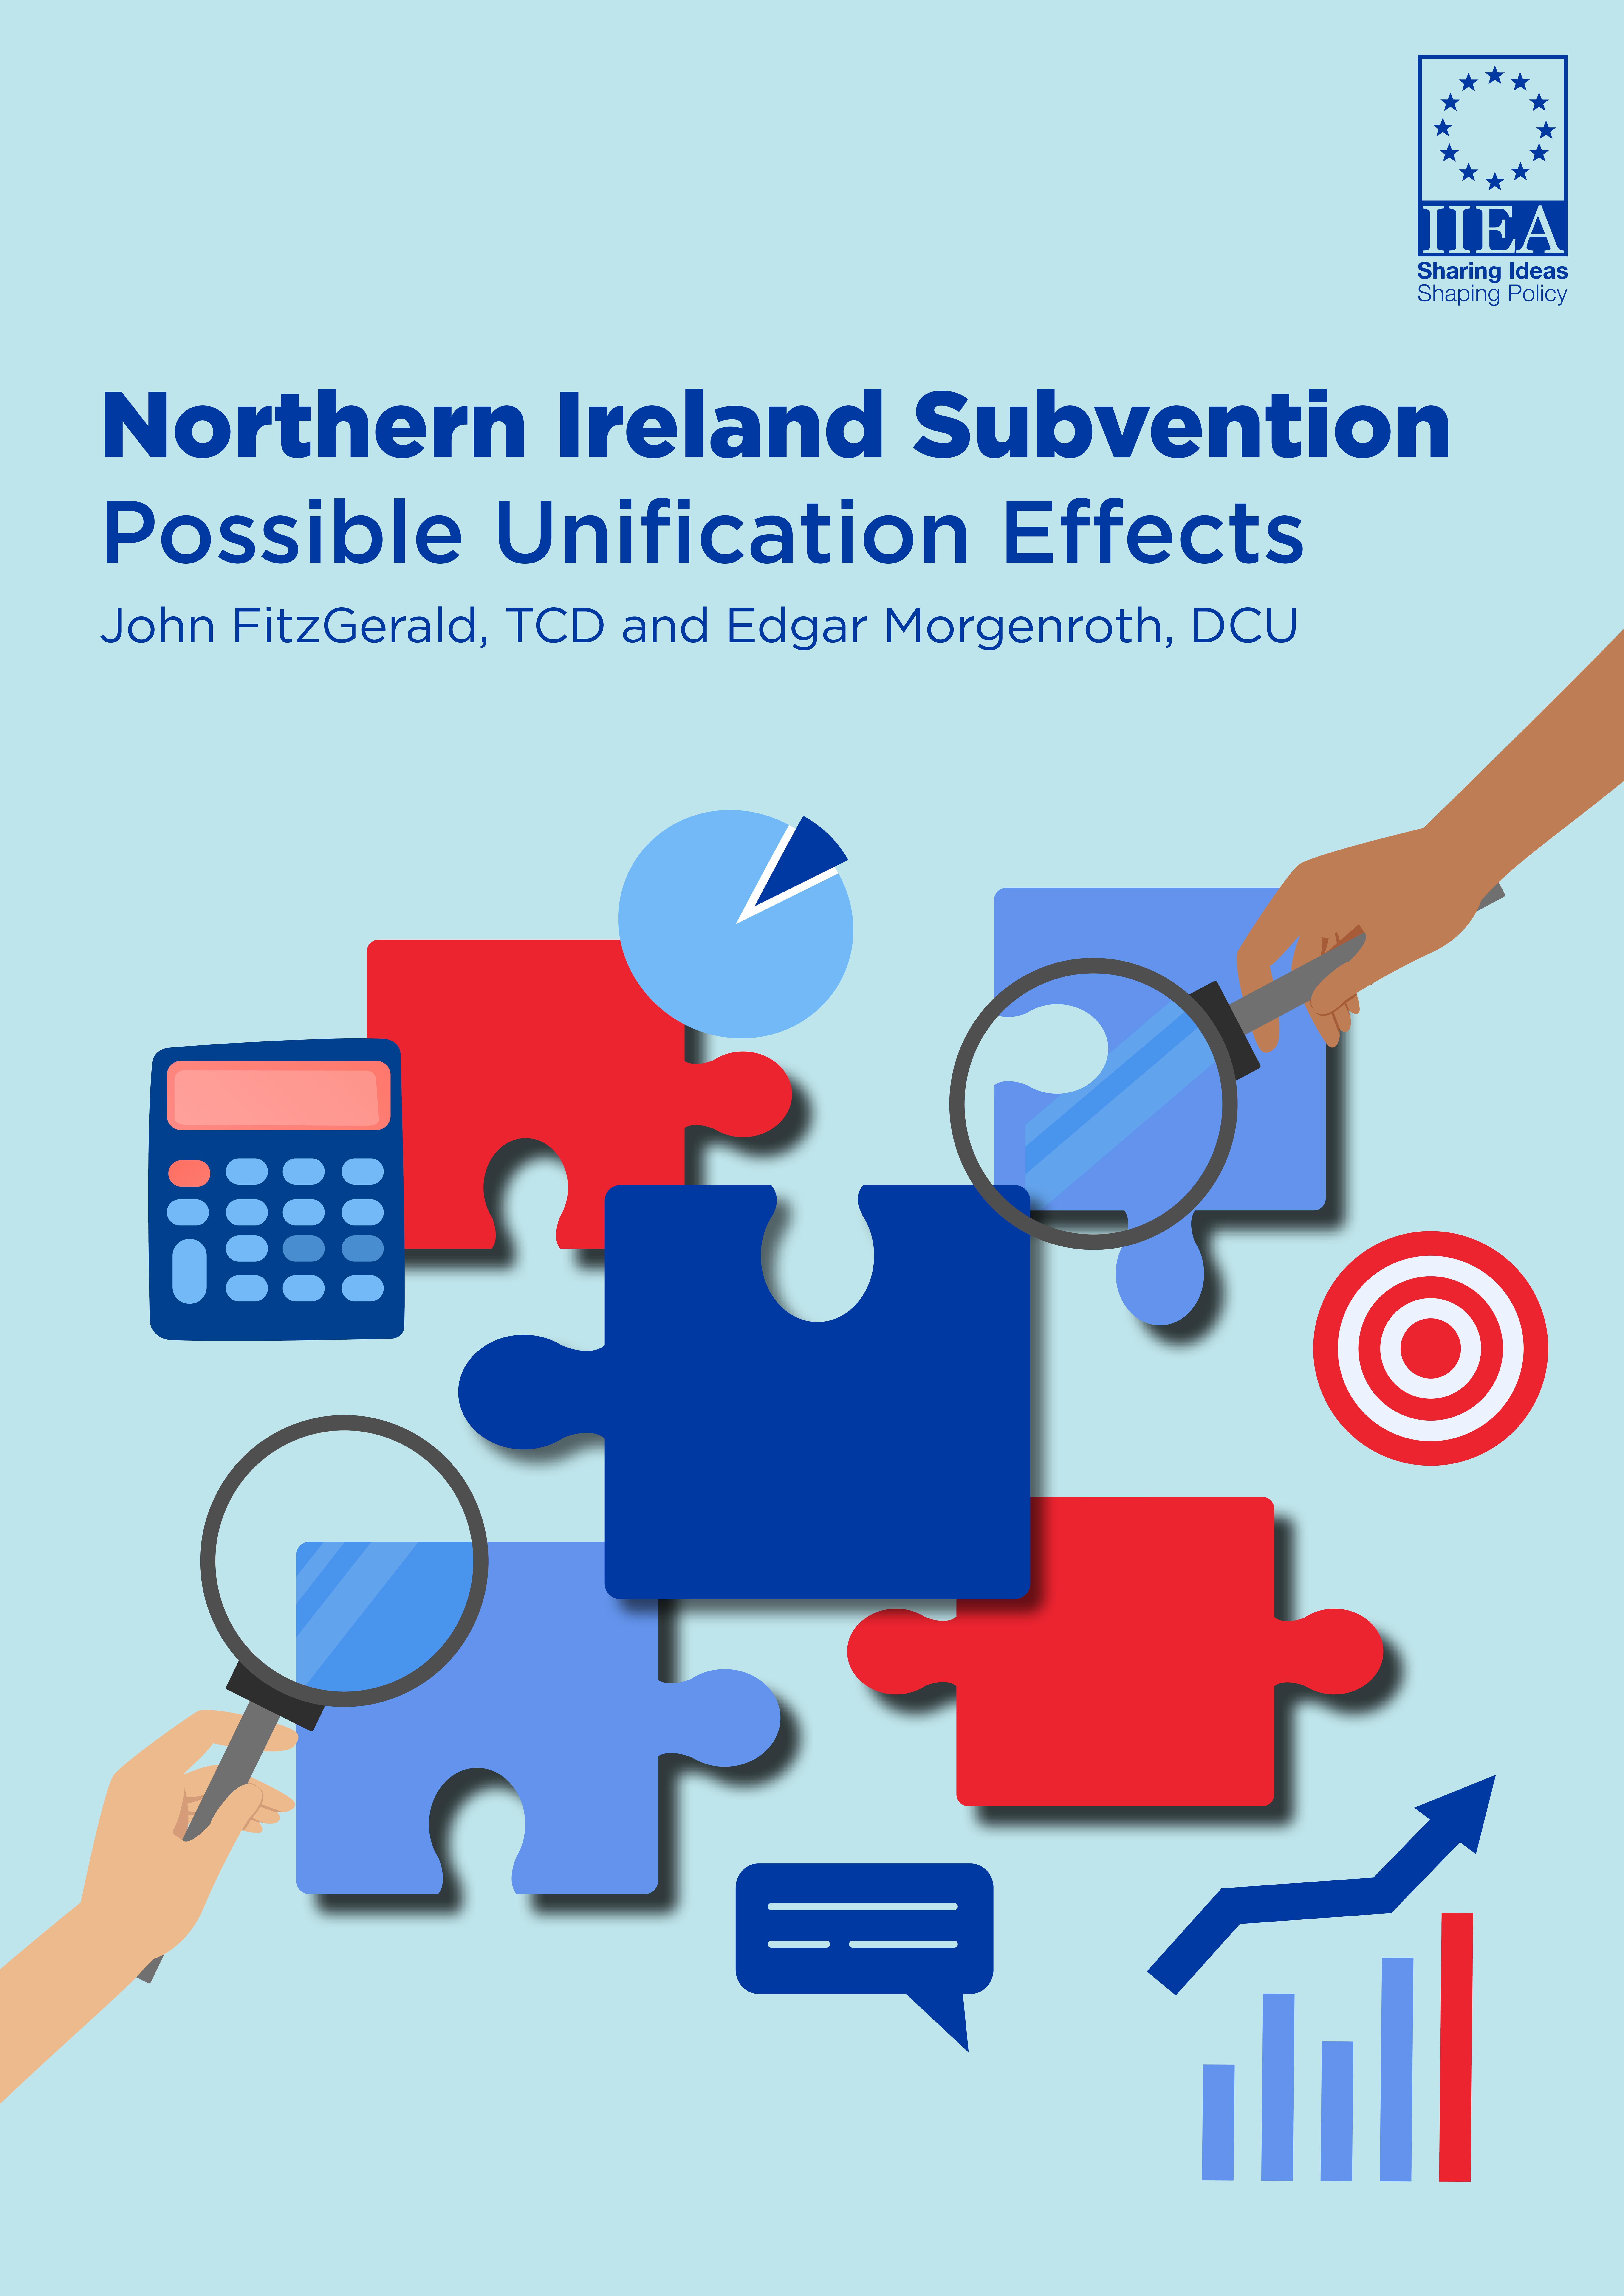 Northern Ireland Subvention: Possible Unification Effects